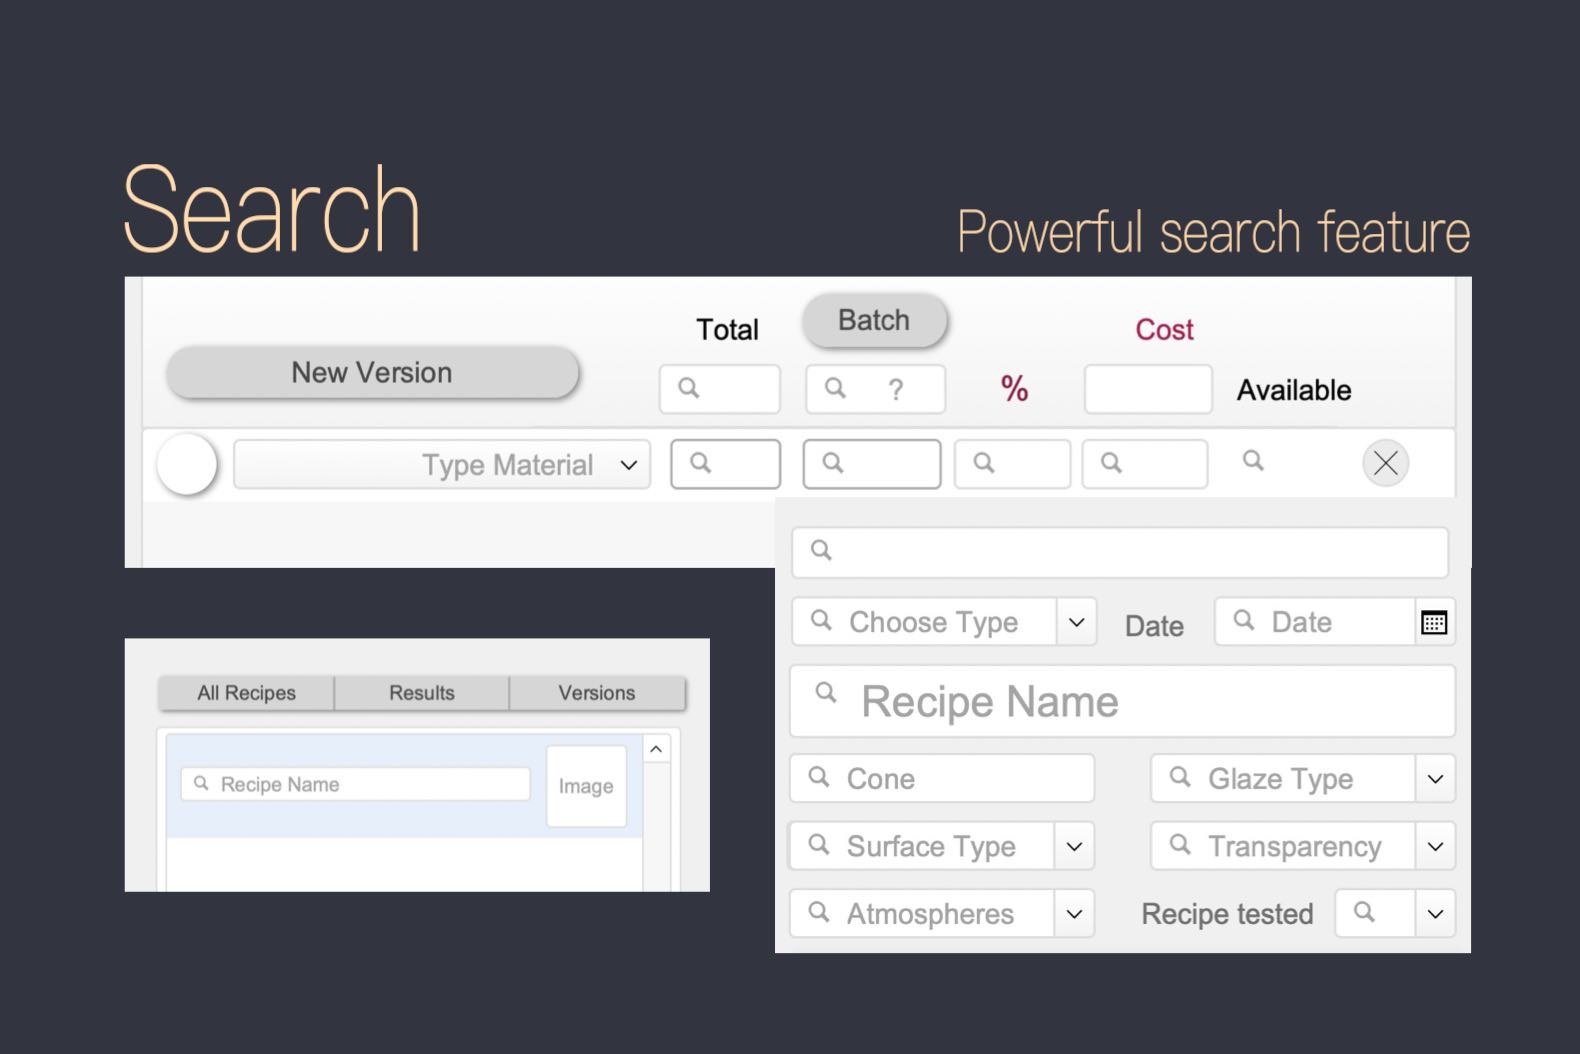 Powerful search feature